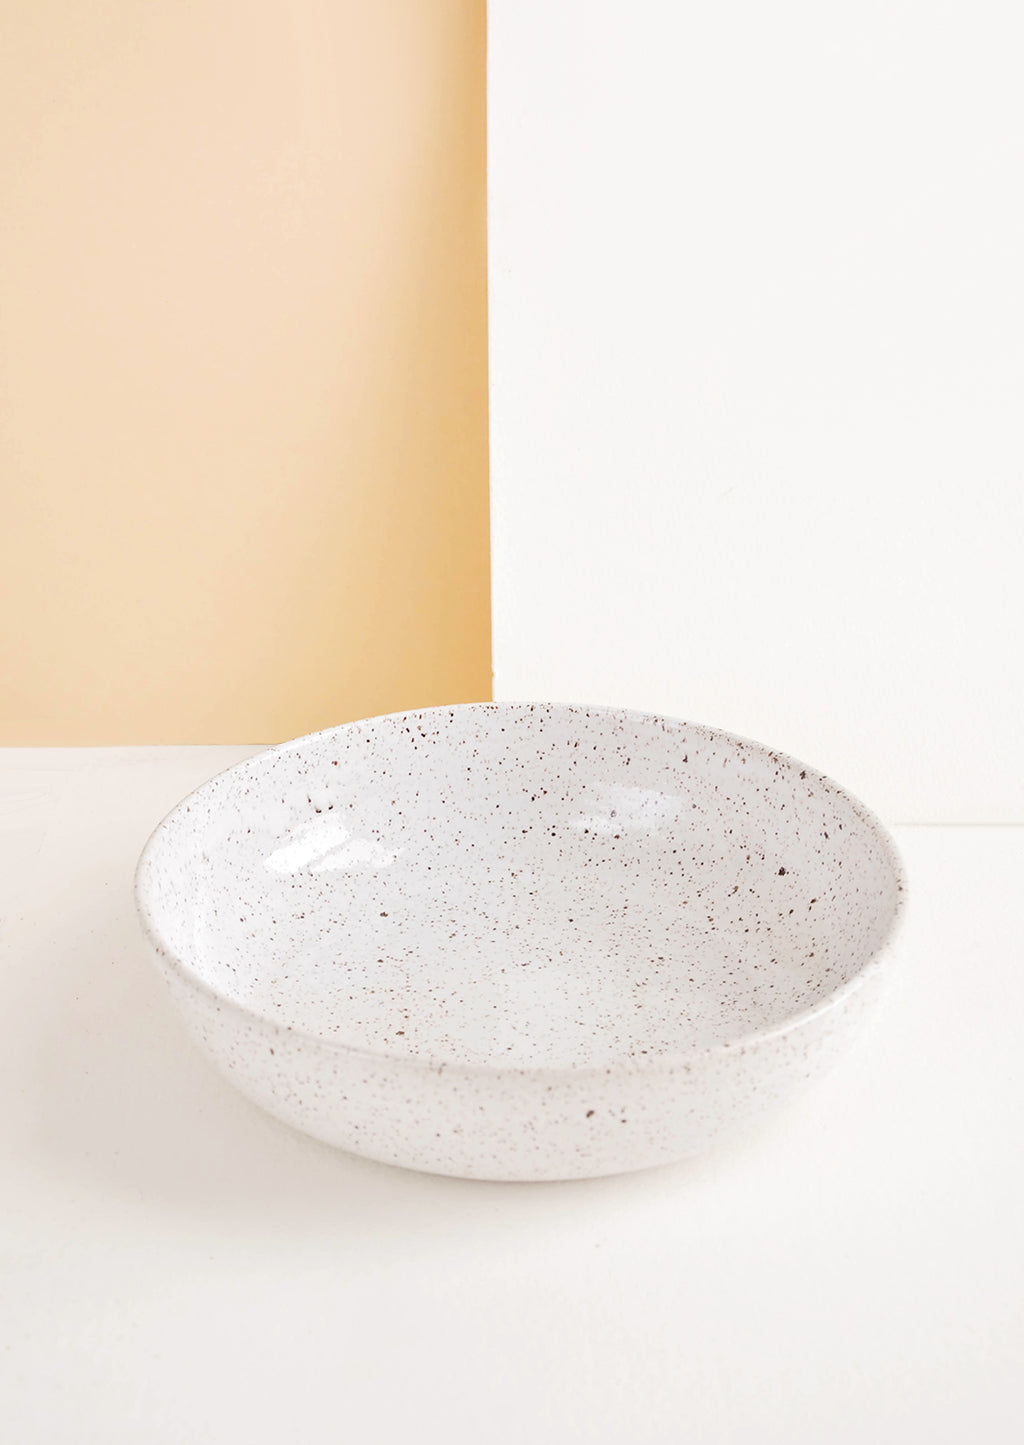 Pasta Bowl [$58.00]: Shallow ceramic bowl, ideal for pasta, in white glaze with brown speckles.